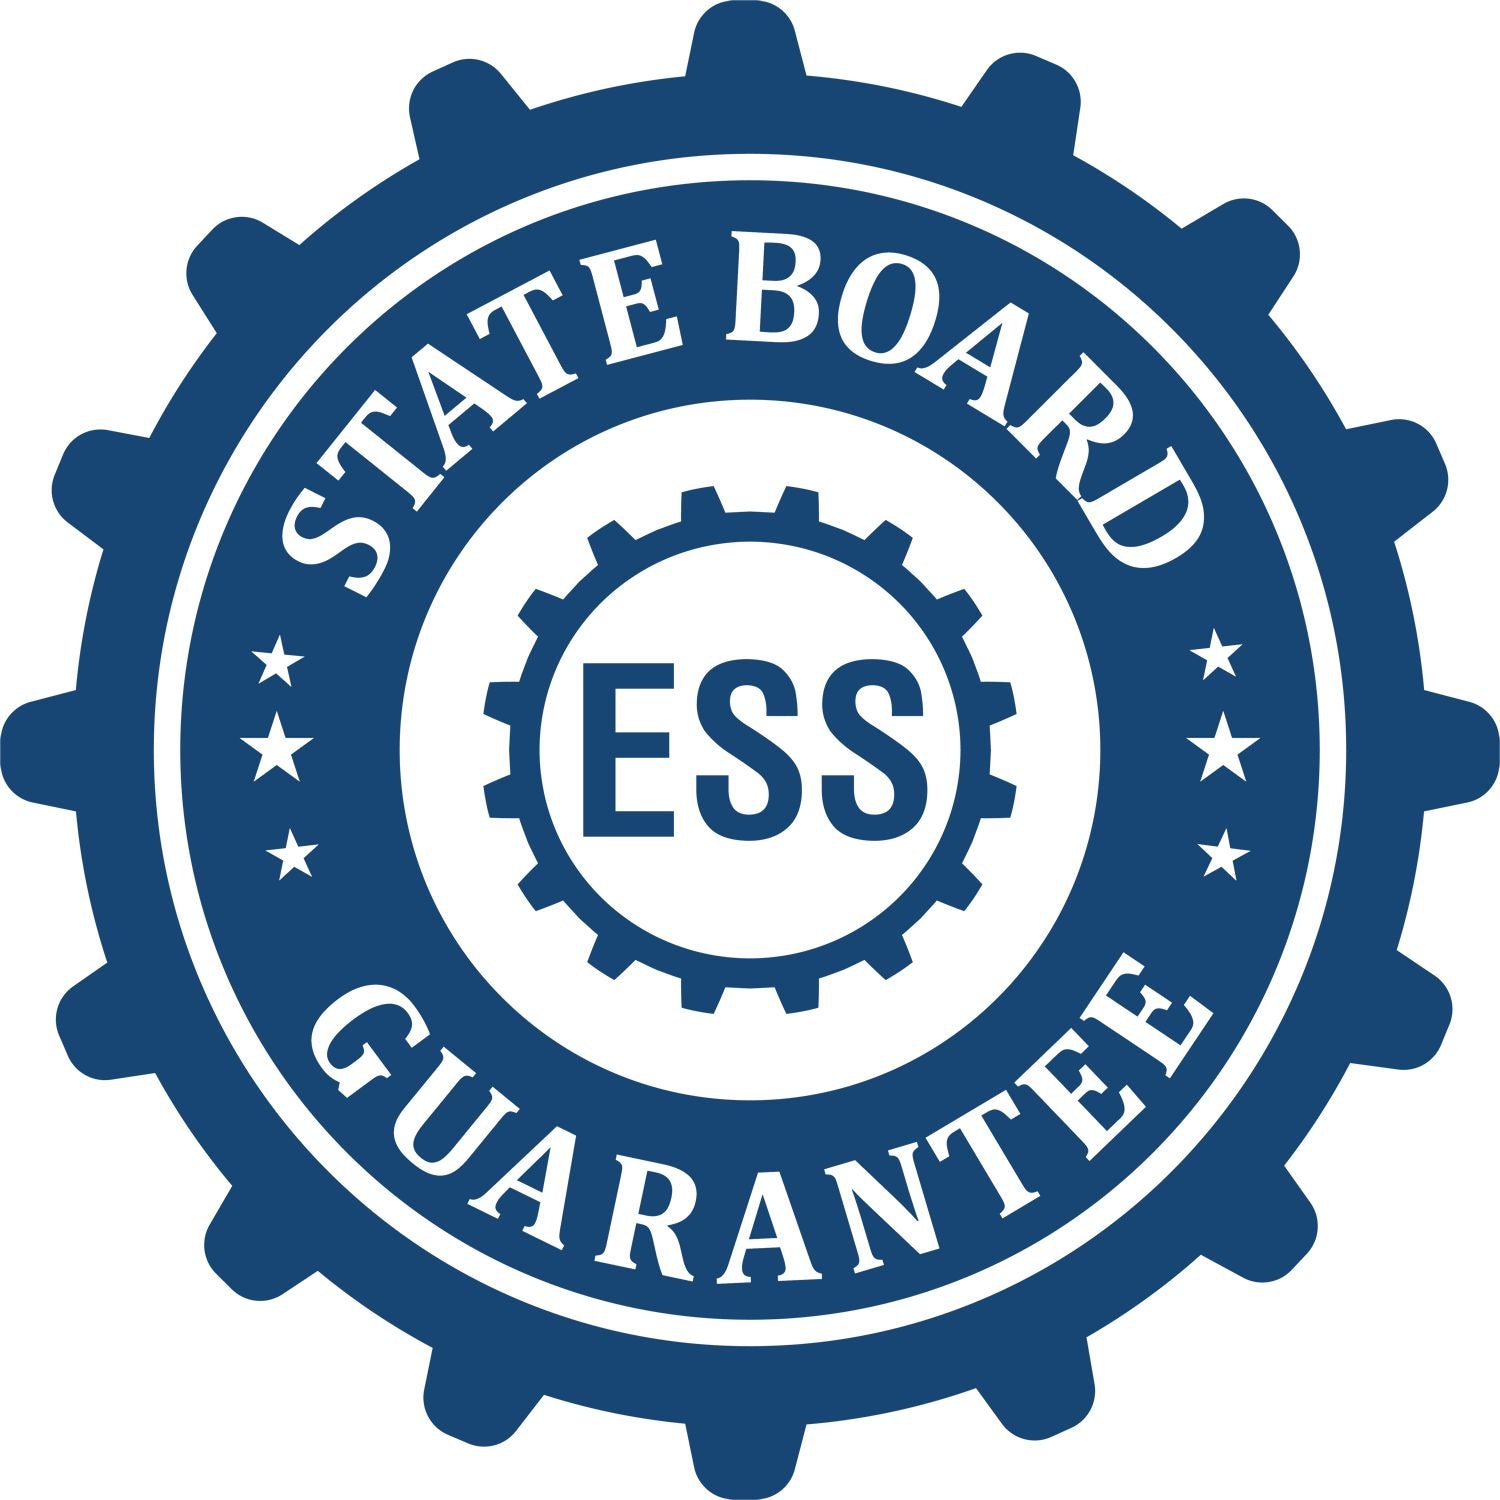 An emblem in a gear shape illustrating a state board guarantee for the State of Oregon Extended Long Reach Engineer Seal product.